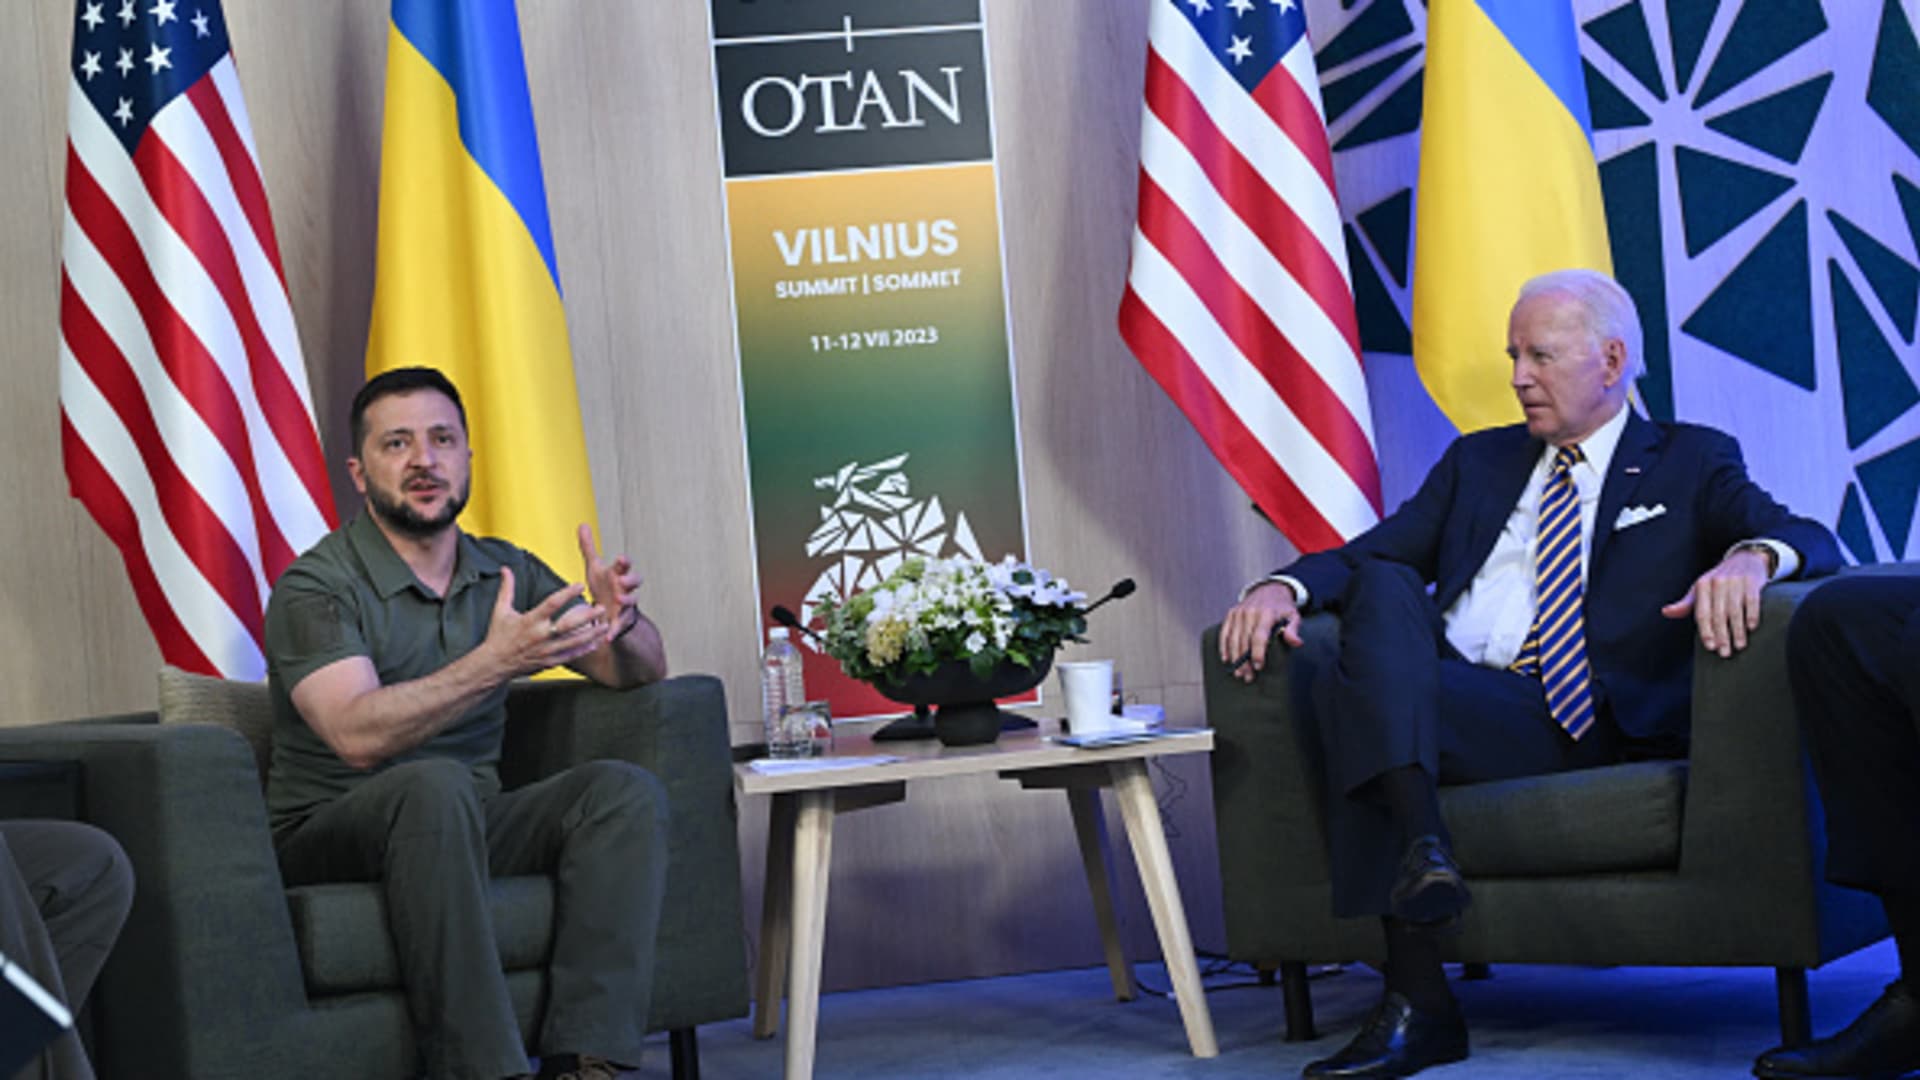 US President Joe Biden (CR) attends a meeting with Ukrainian President Volodymyr Zelensky at the sidelines of the NATO Summit in Vilnius on July 12, 2023. 